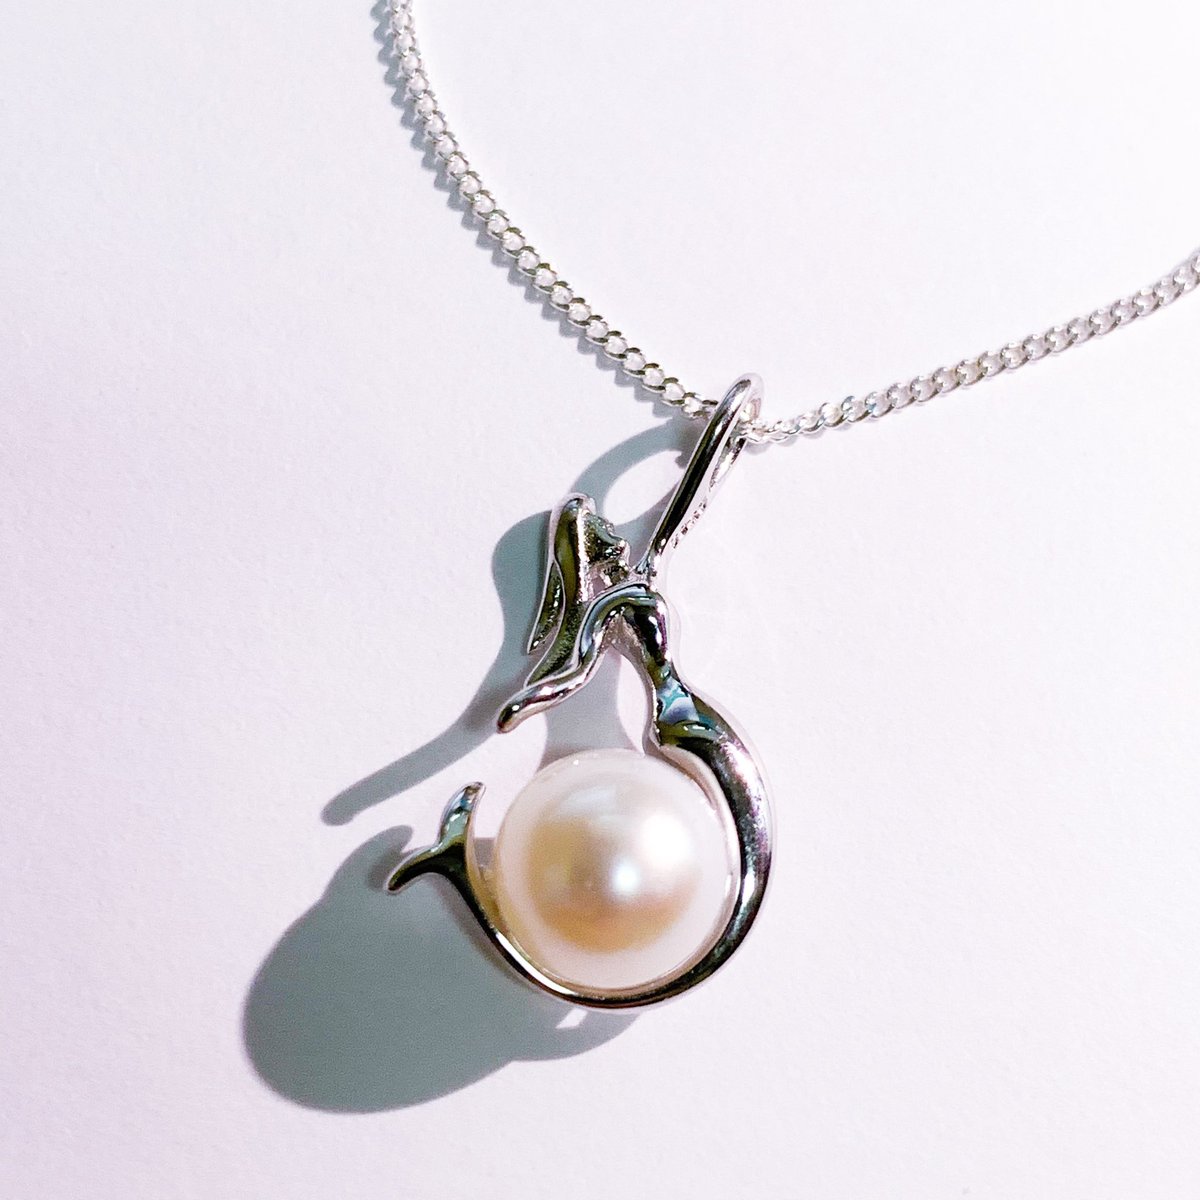 This beautiful Akoya Pearl Necklace is one of our best selling designs. Get yours at ellisfinch.com #akoyapearls #jewellery #necklace #gifts #edinburgh #scotland